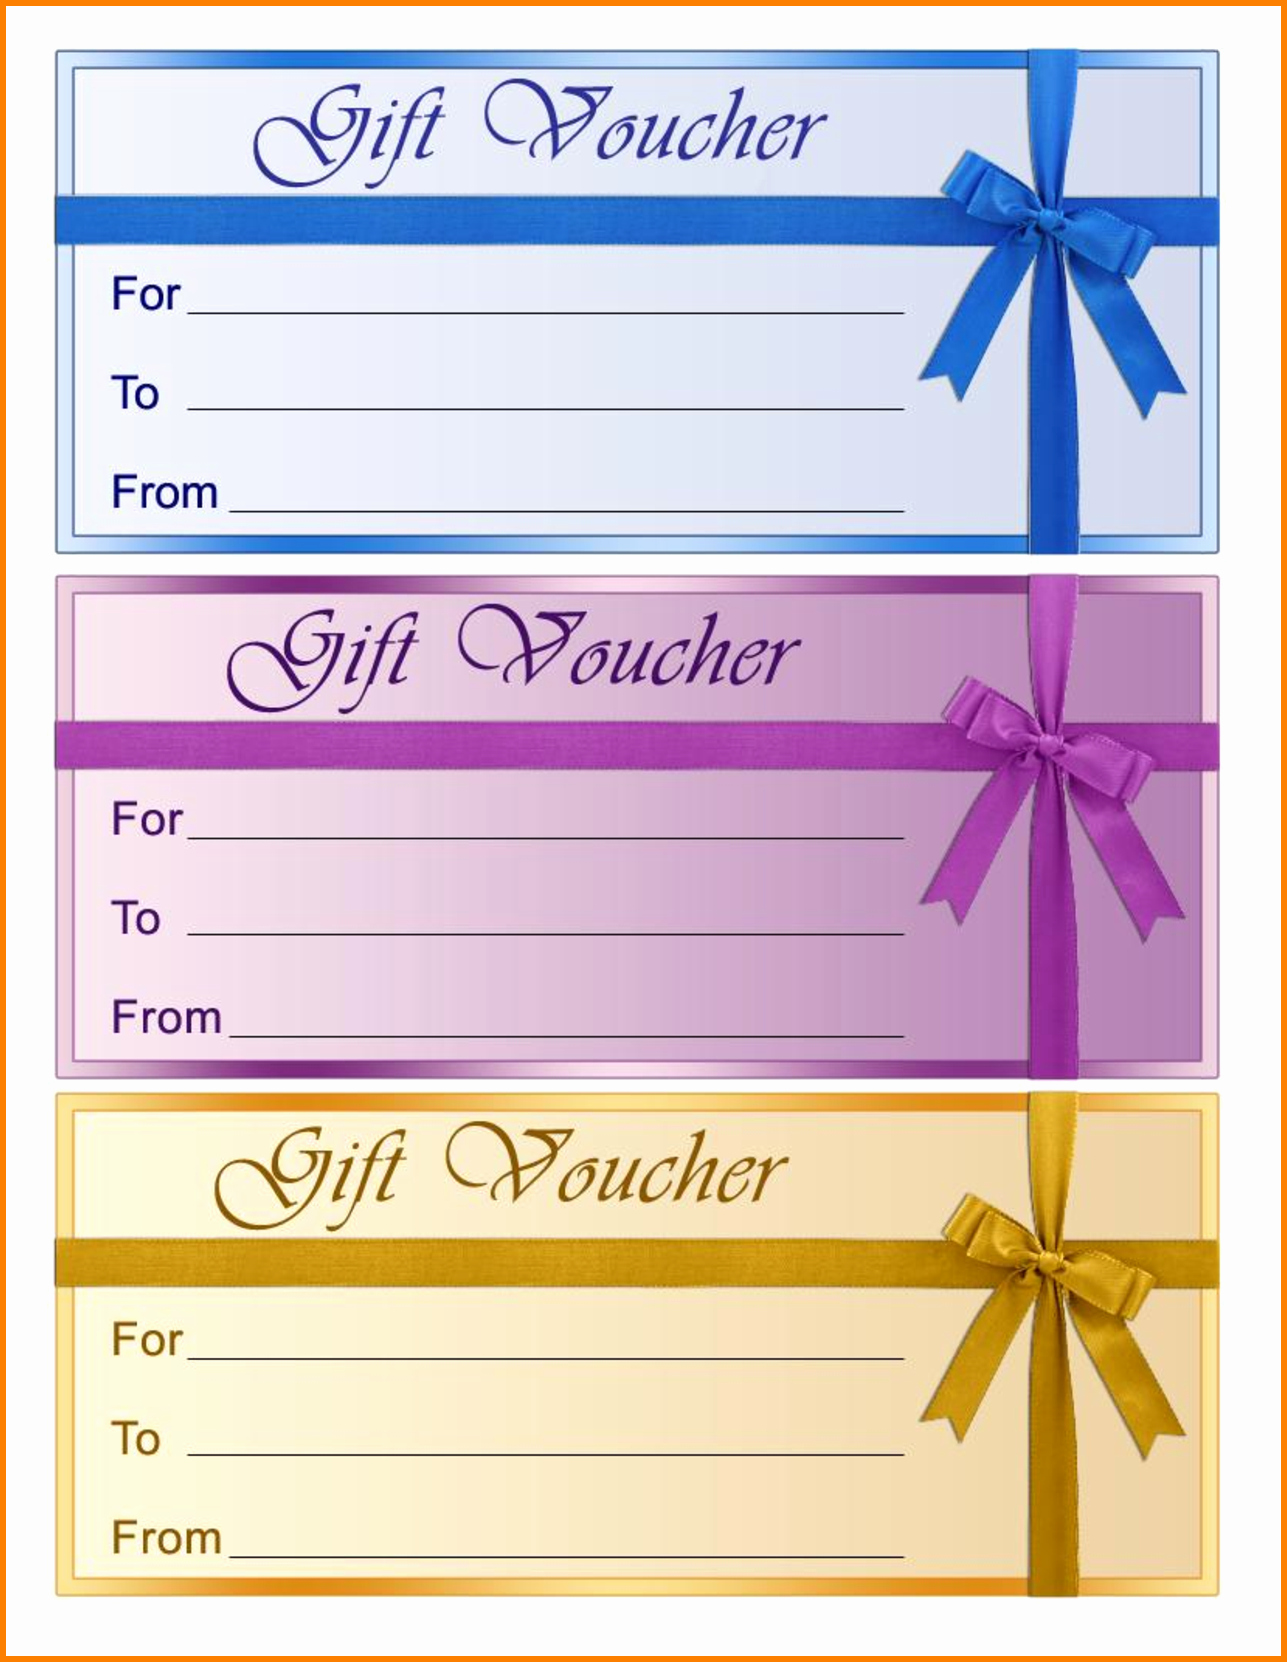 Gift Certificate Samples Free Templates Beautiful Perfect format Samples Of Gift Voucher and Certificate